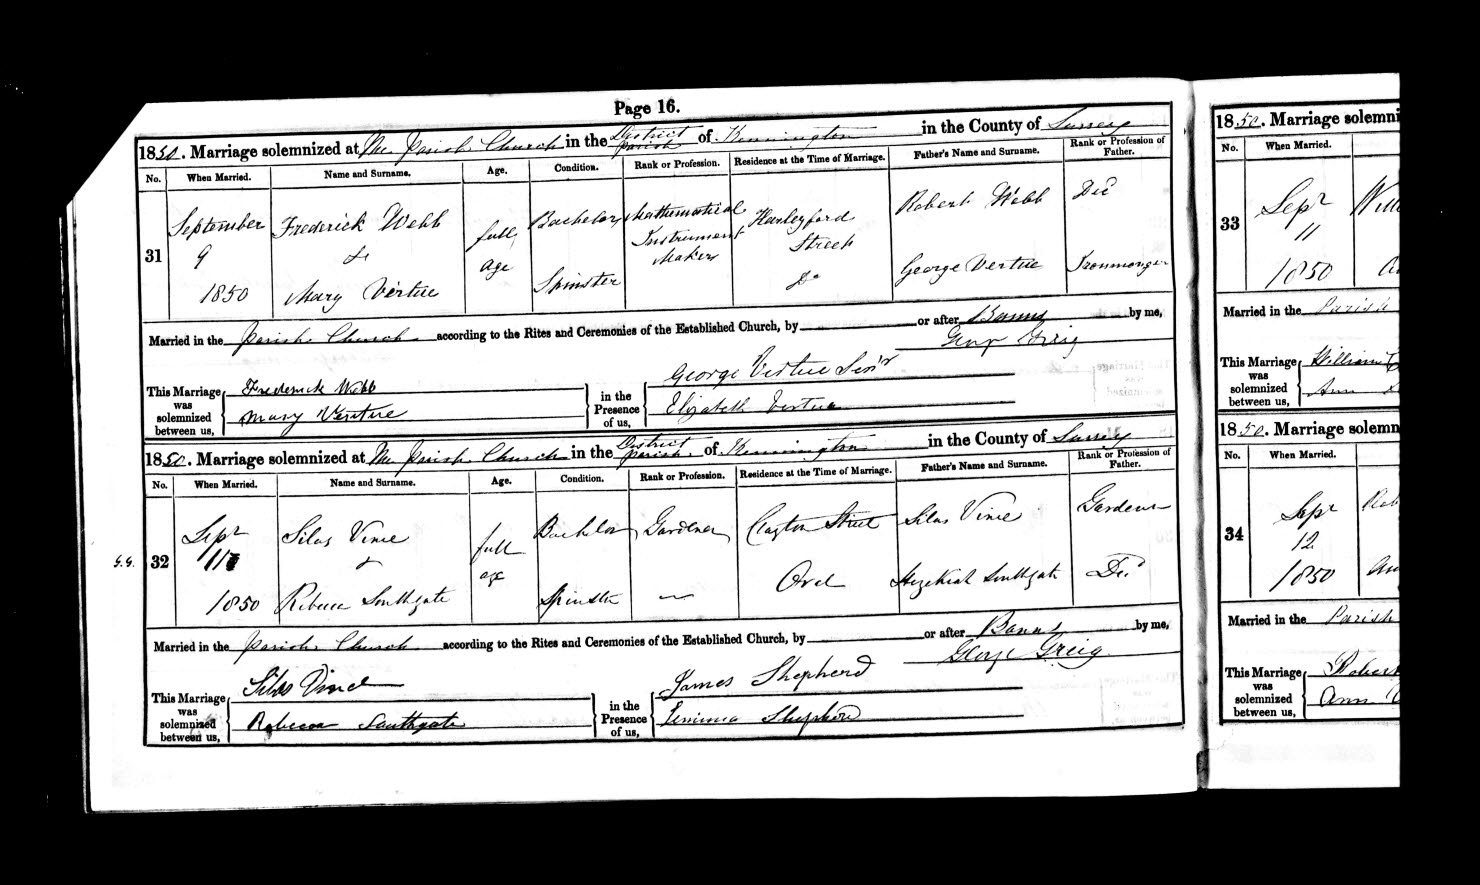 1850 marriage of Mary Vertue to Frederick Webb